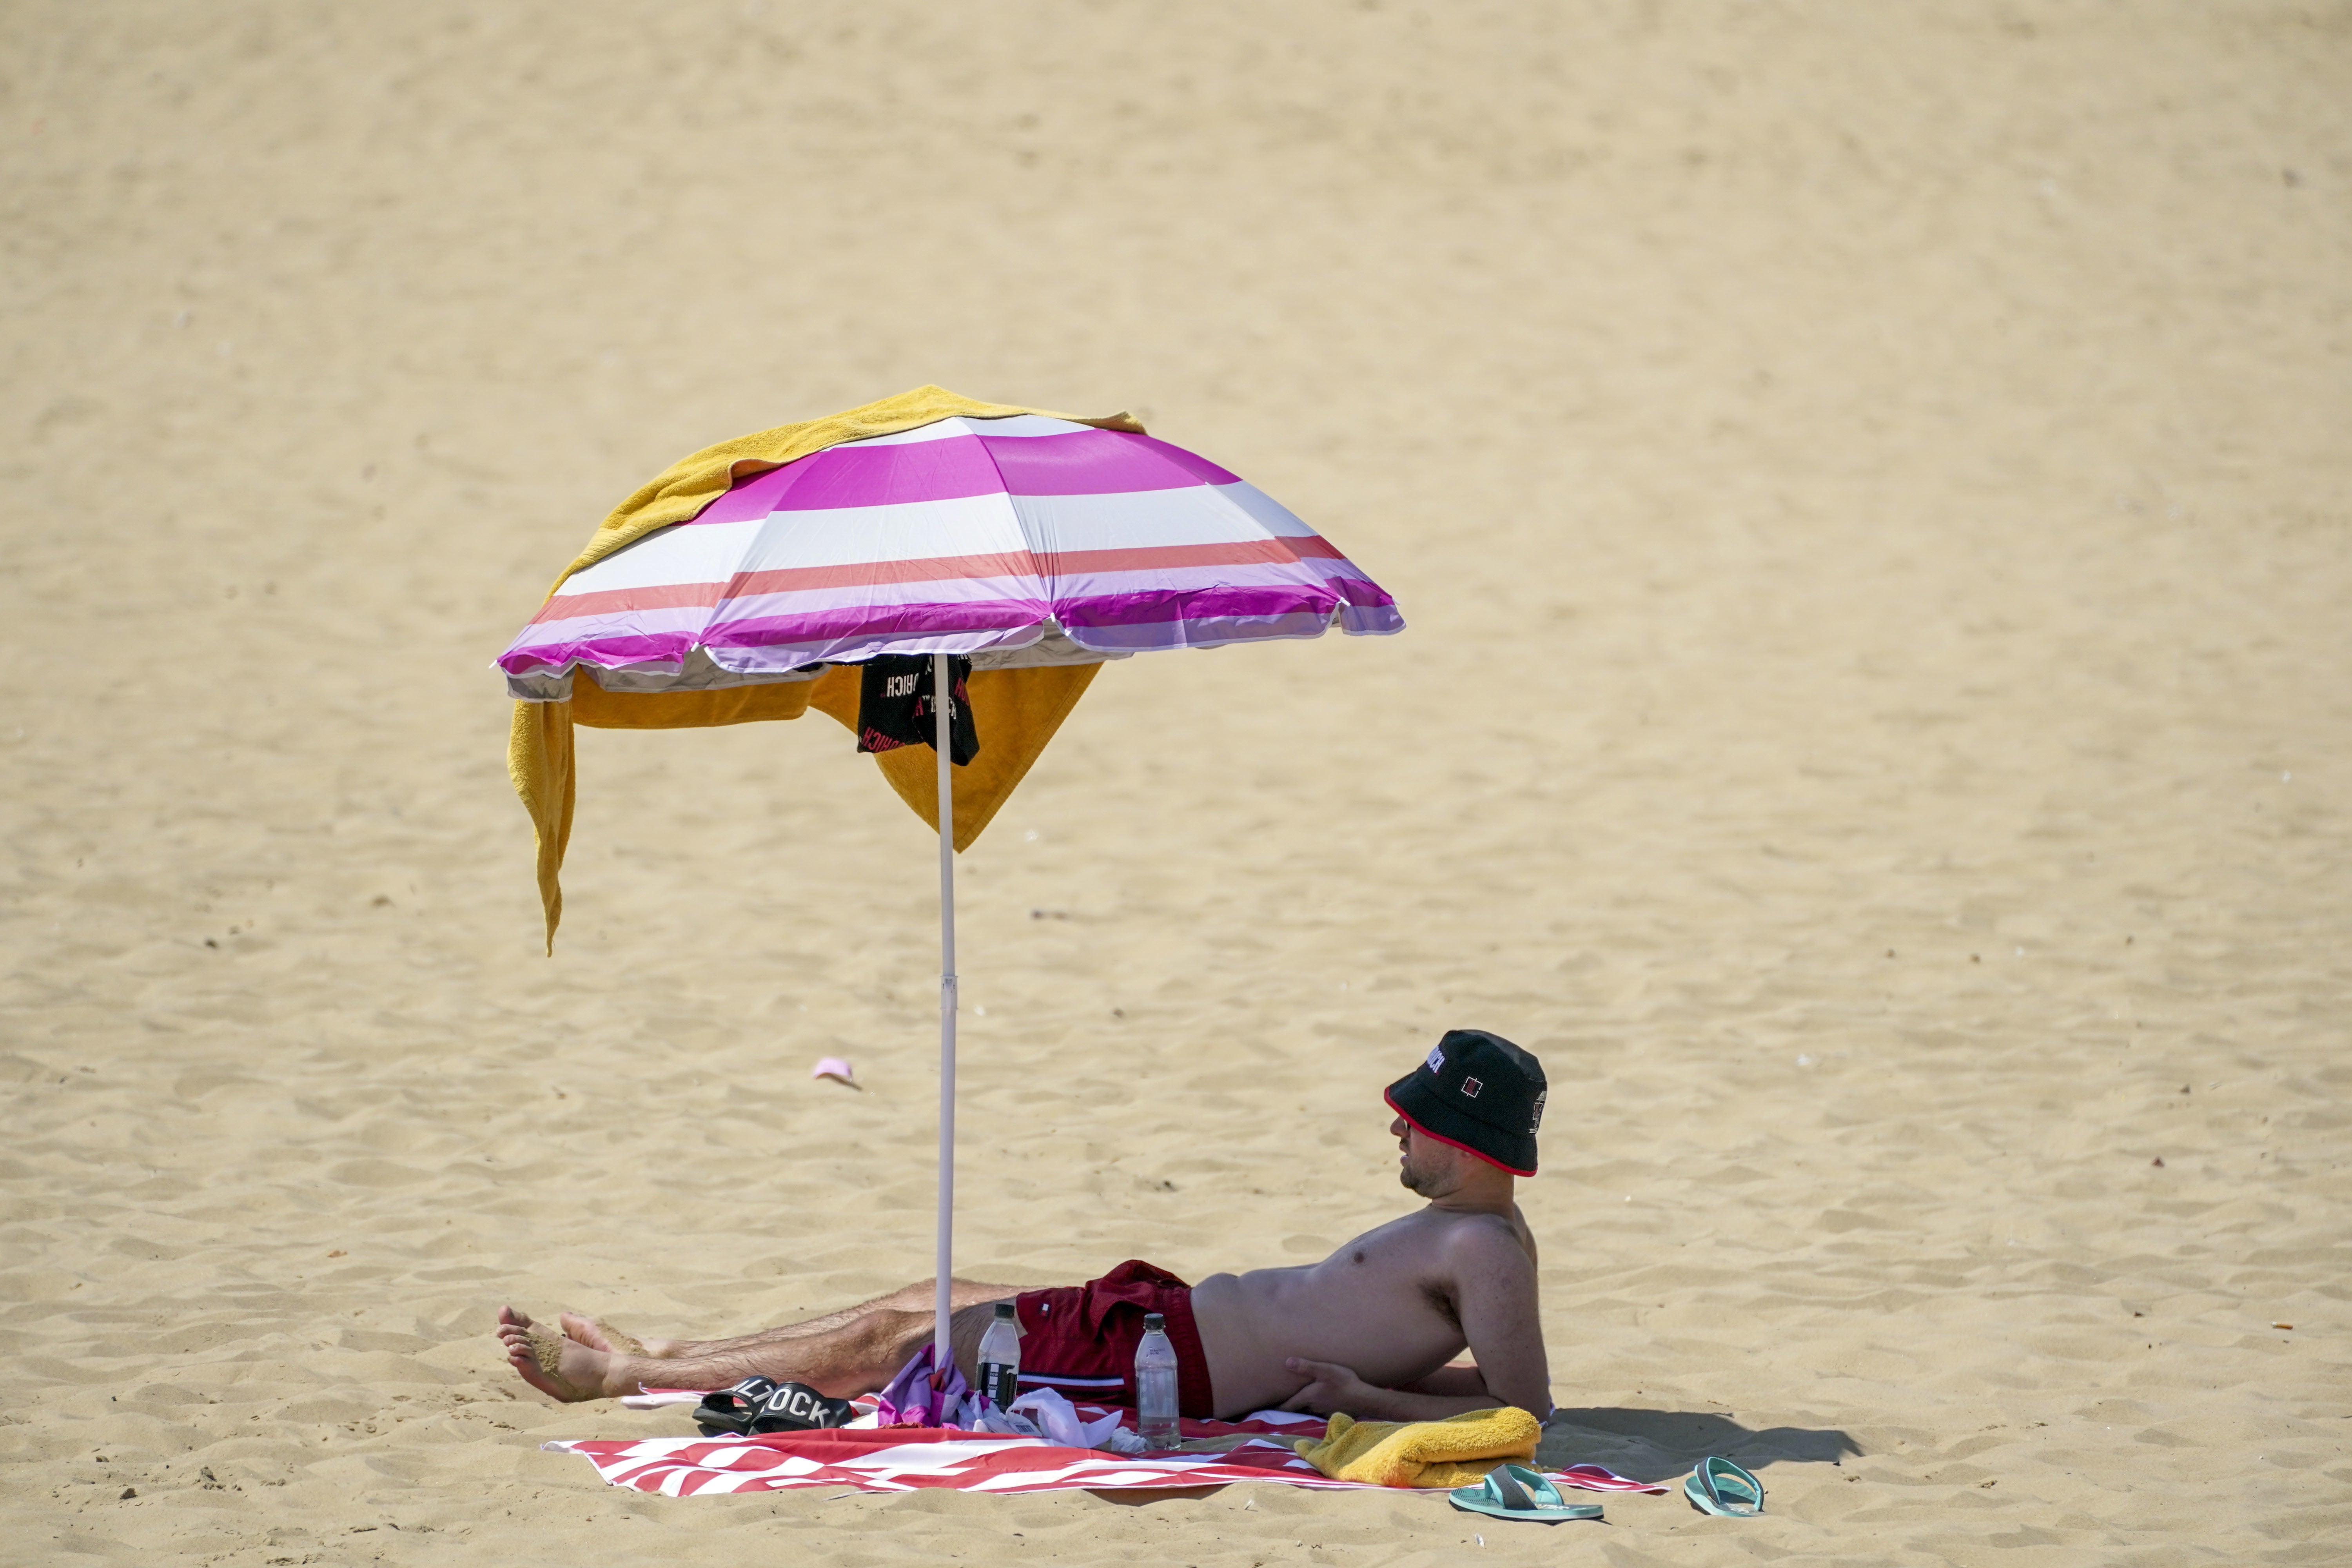 A man shelters under a umbrella on the beach in Bournemouth